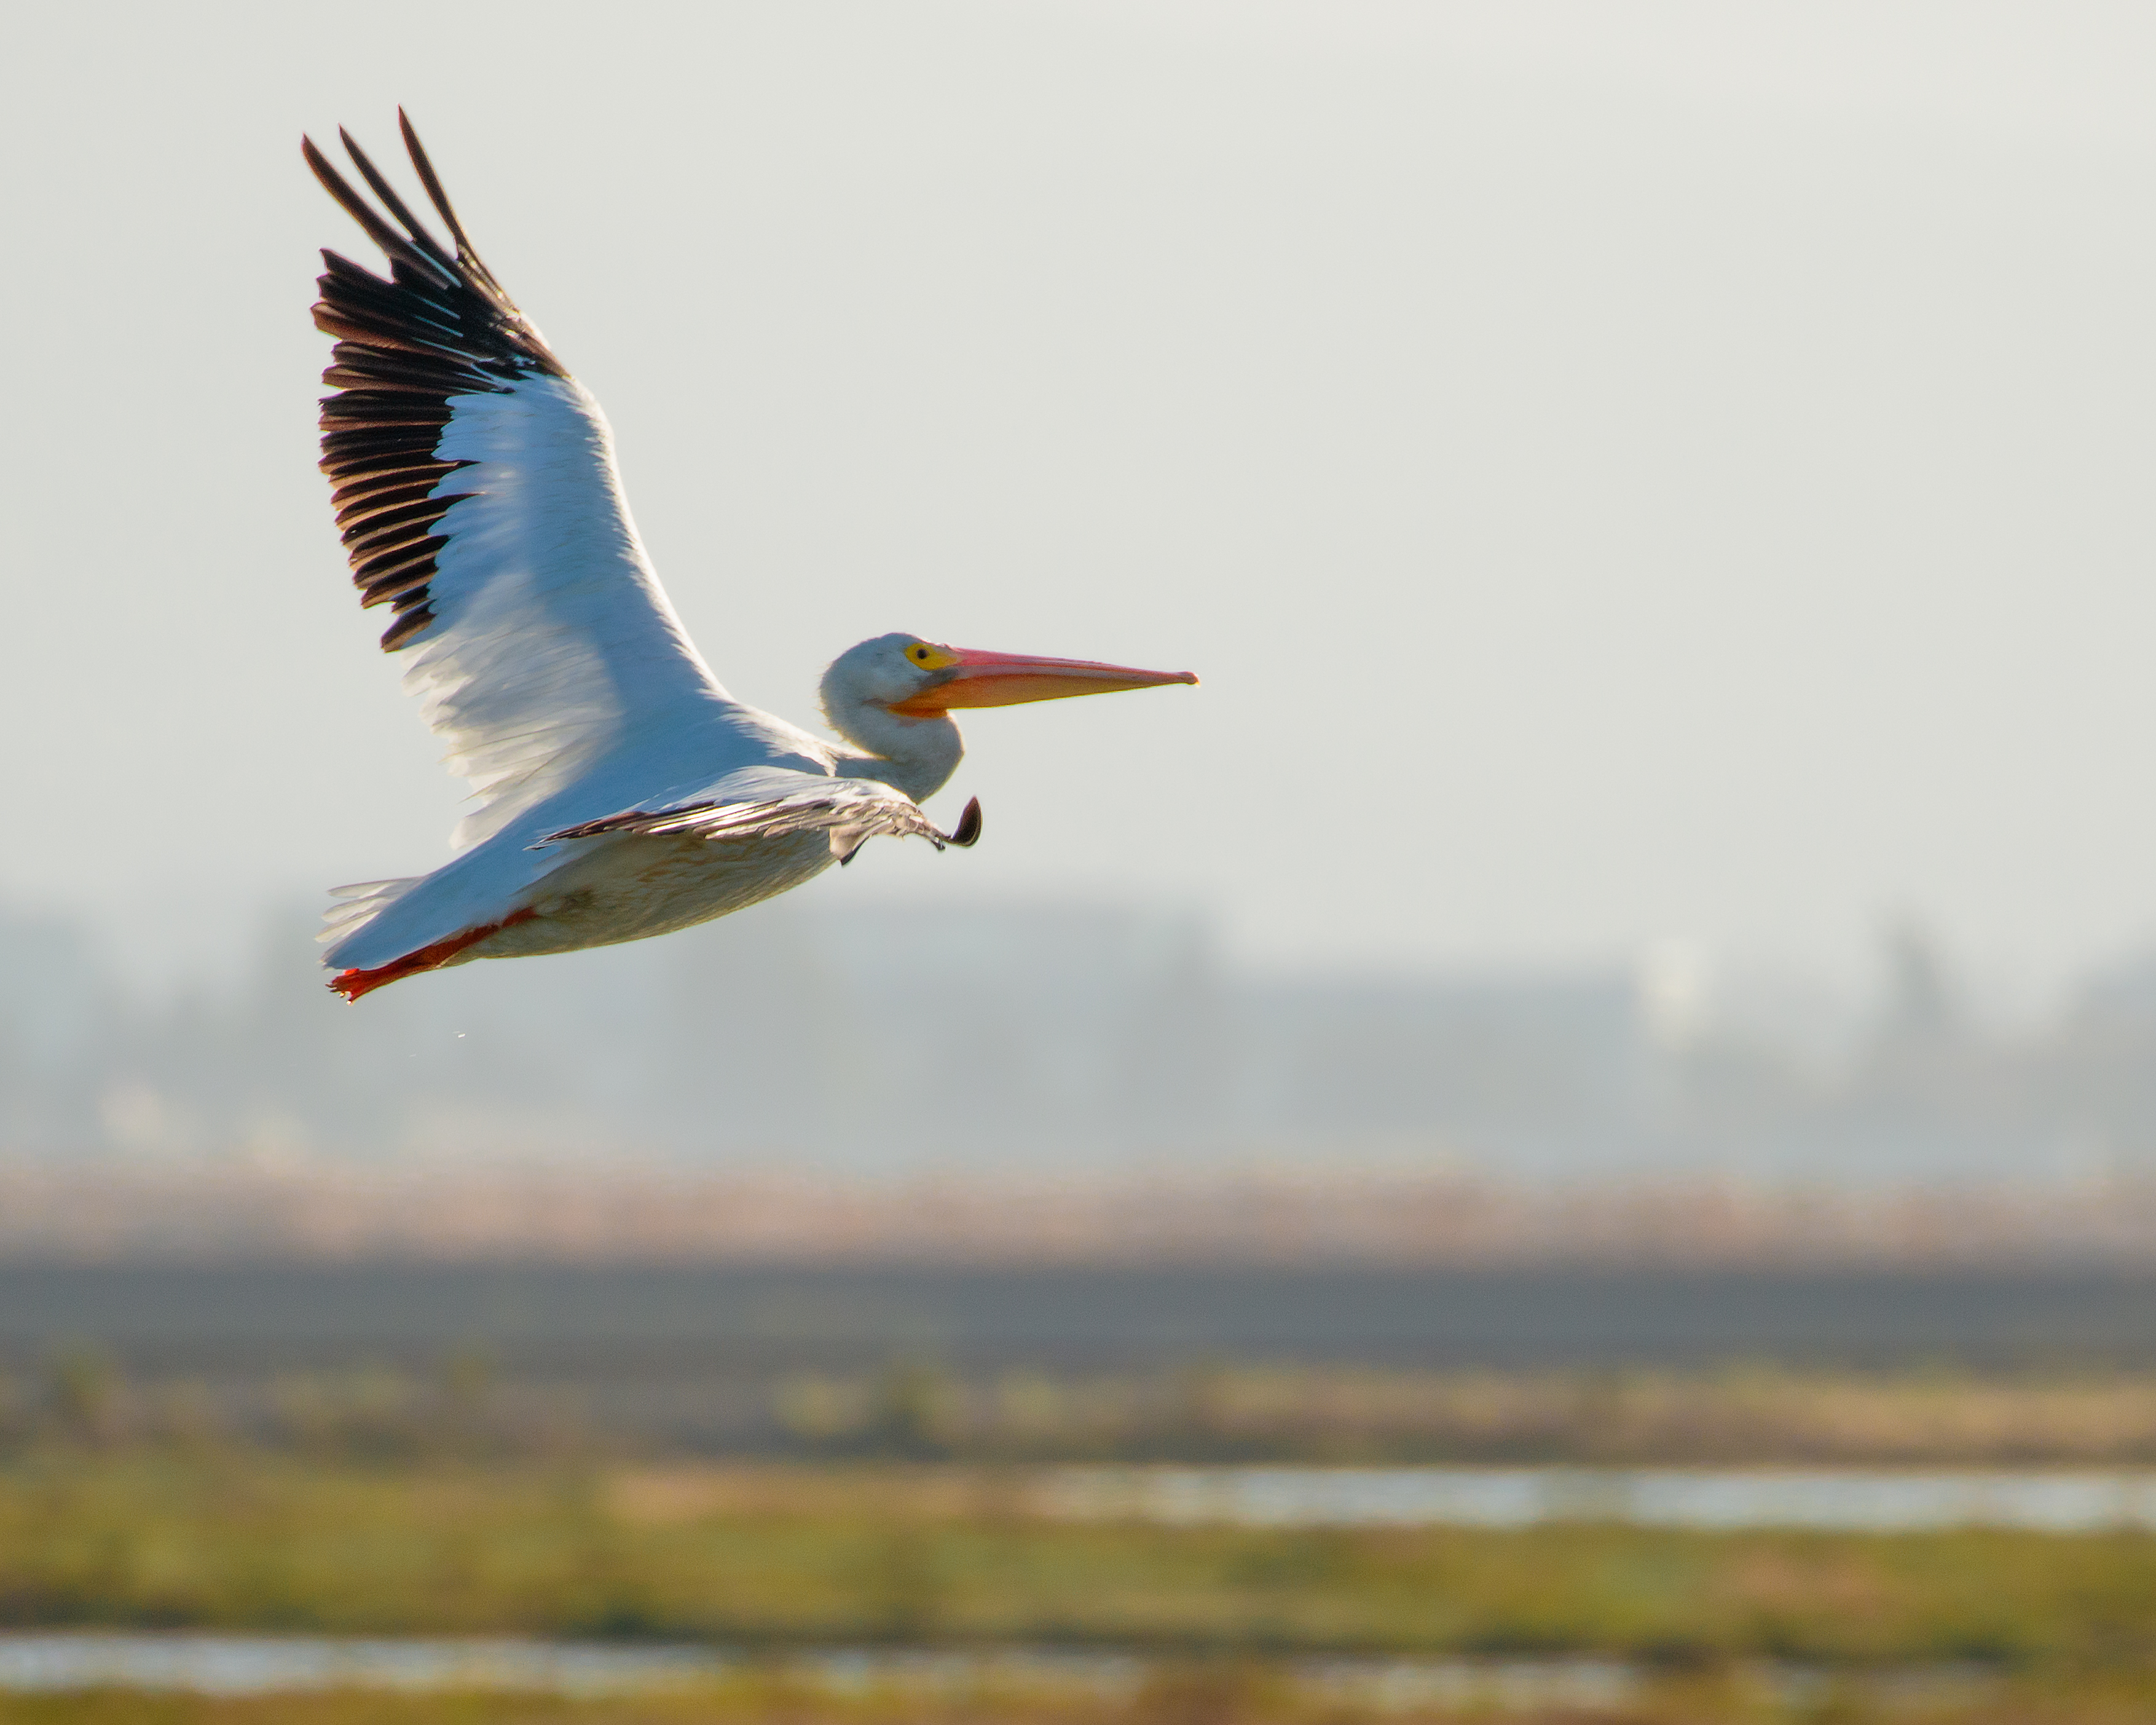 White pelican flying over a marsh with a city in the background.